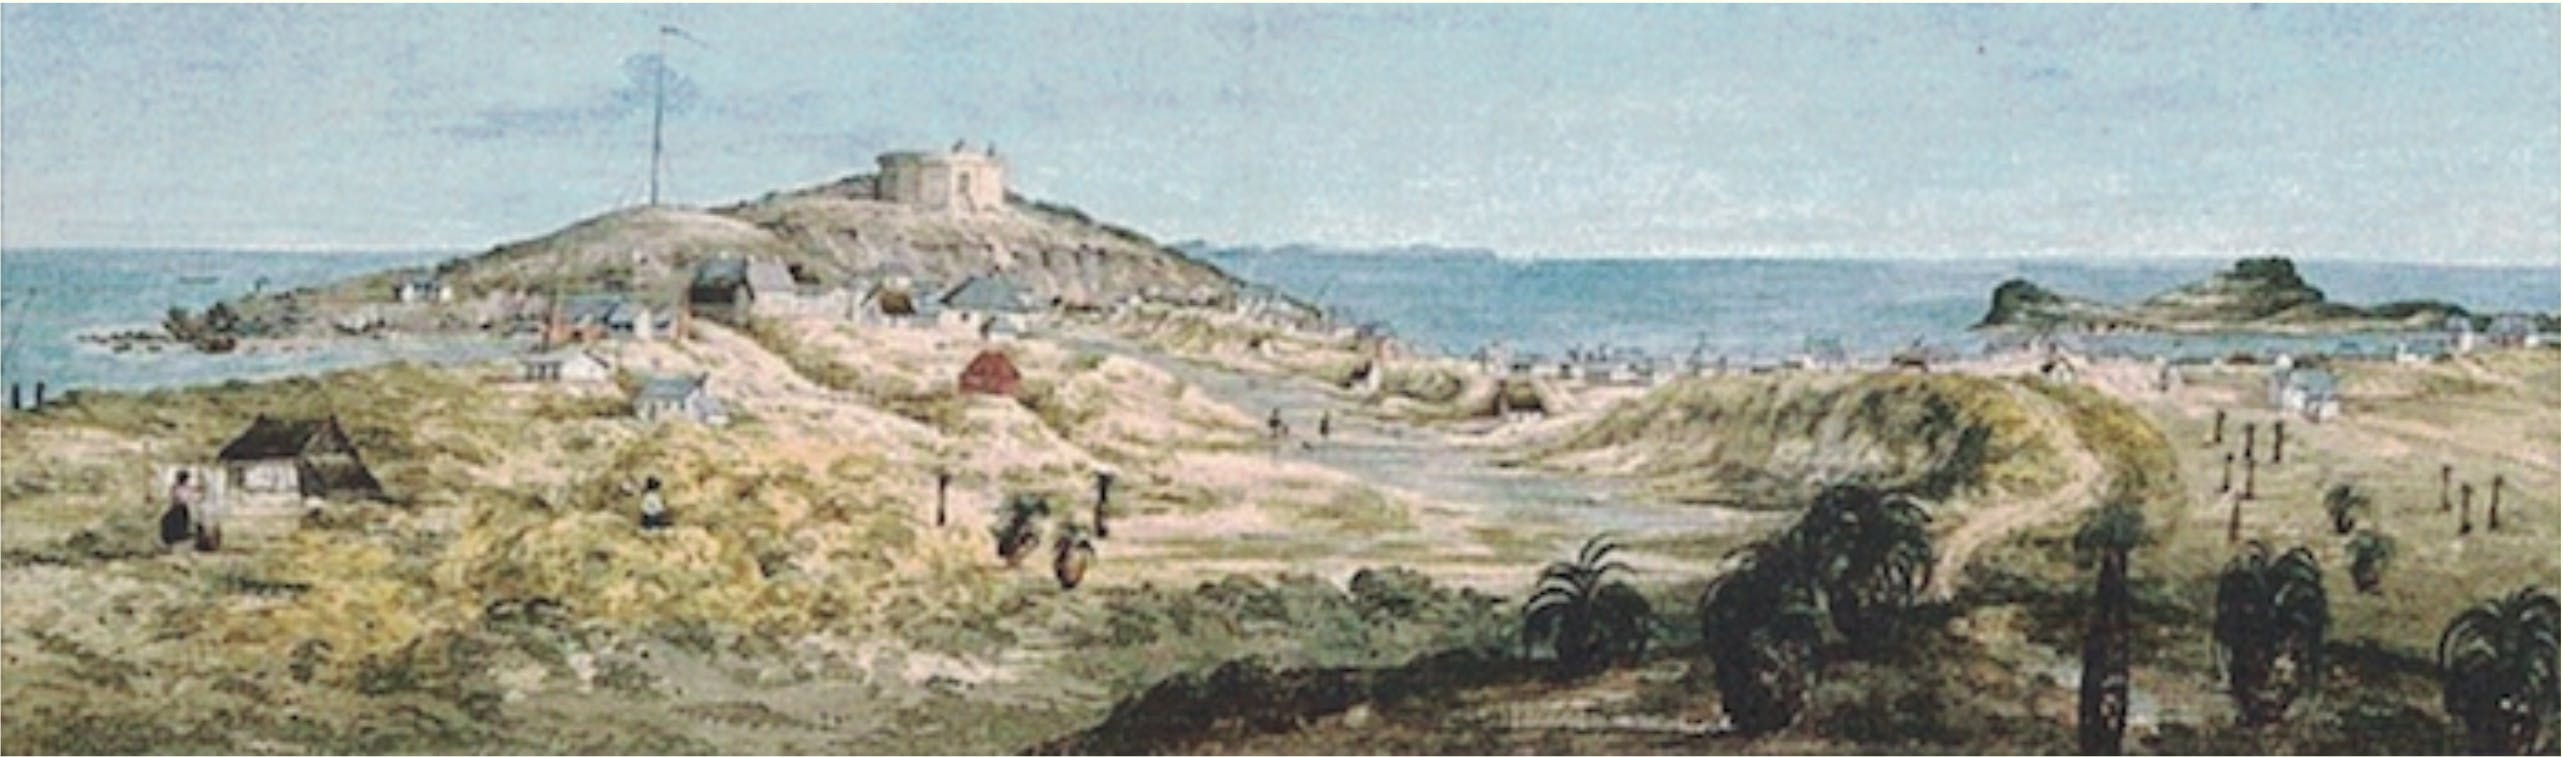 Panorama of the Swan River Settlement